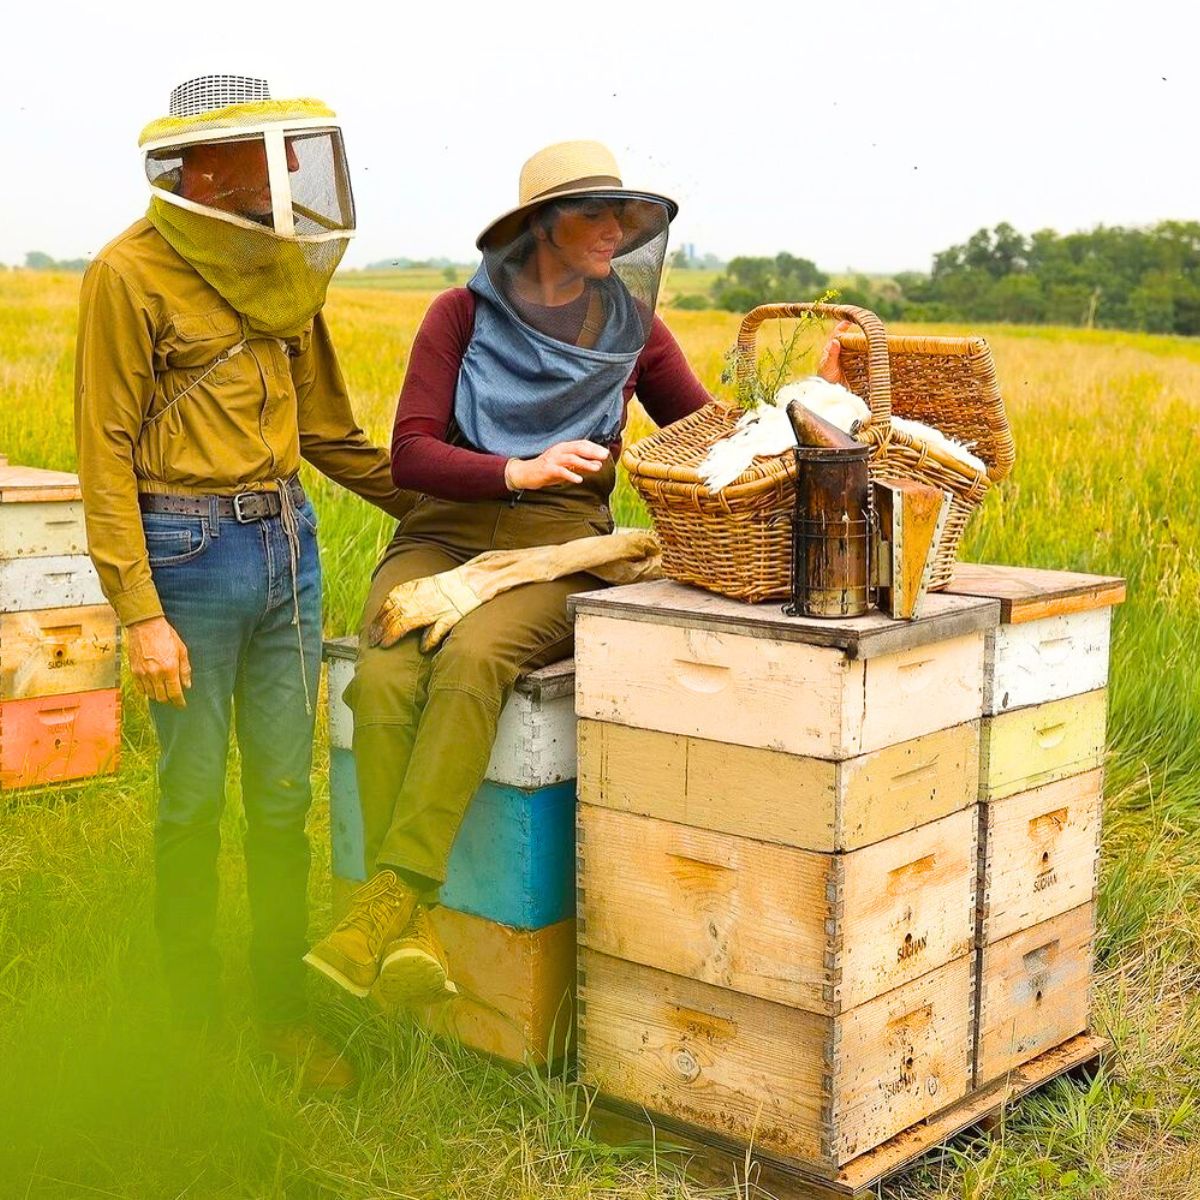 Importance of bees for the ecosystem